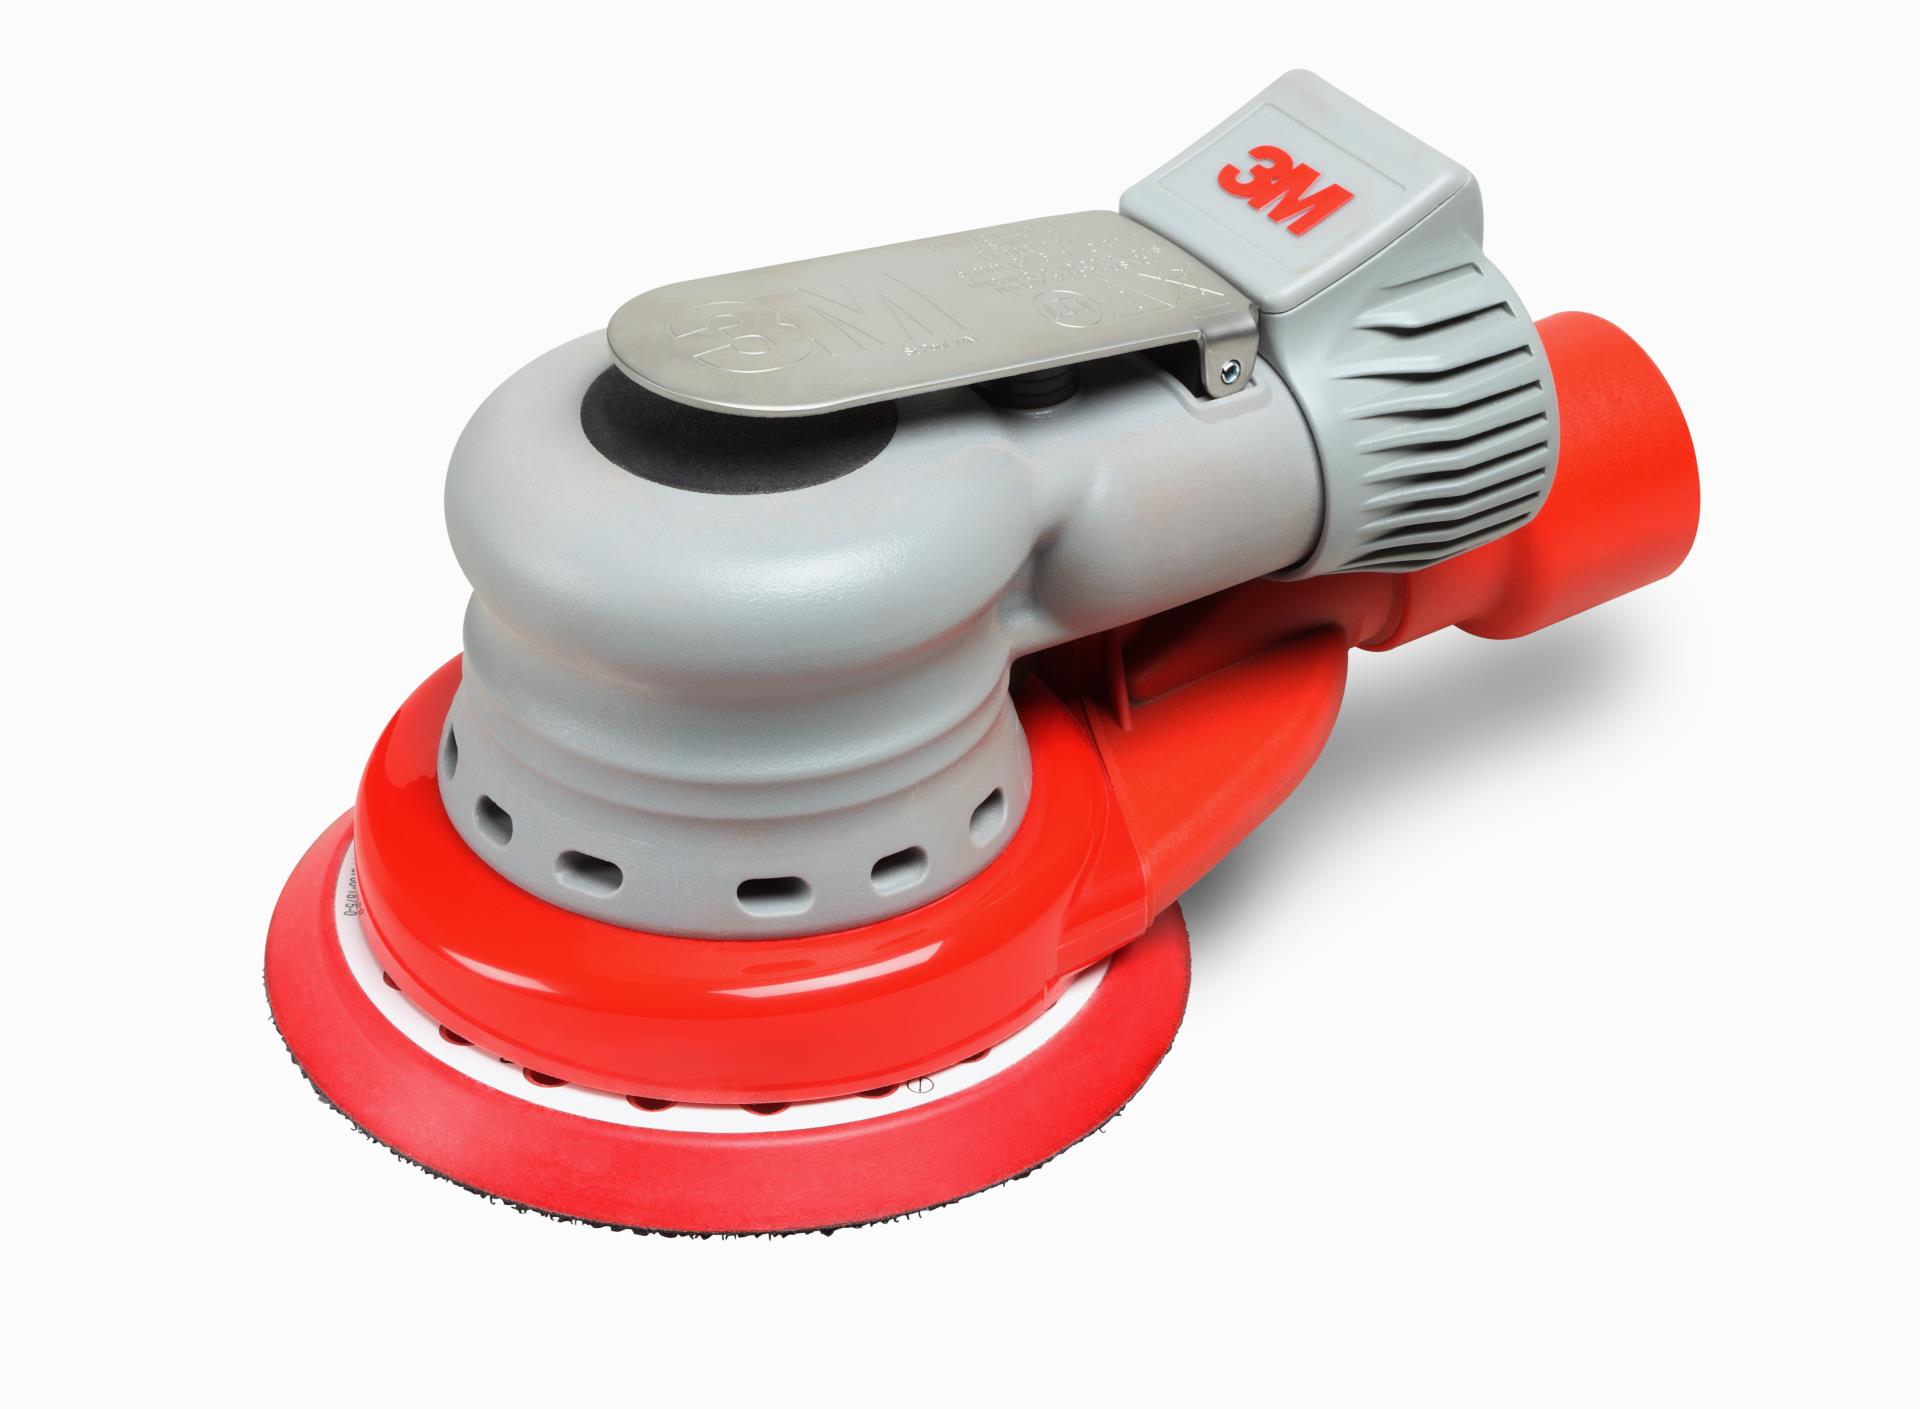 00051125948135 Refurbish and Repair for 3M™ Electric Random Orbital Sander  28431, in, Central Vac, 3/16 in Orbit, Service Part, Return Required  Aircraft products power-sanders 9361129